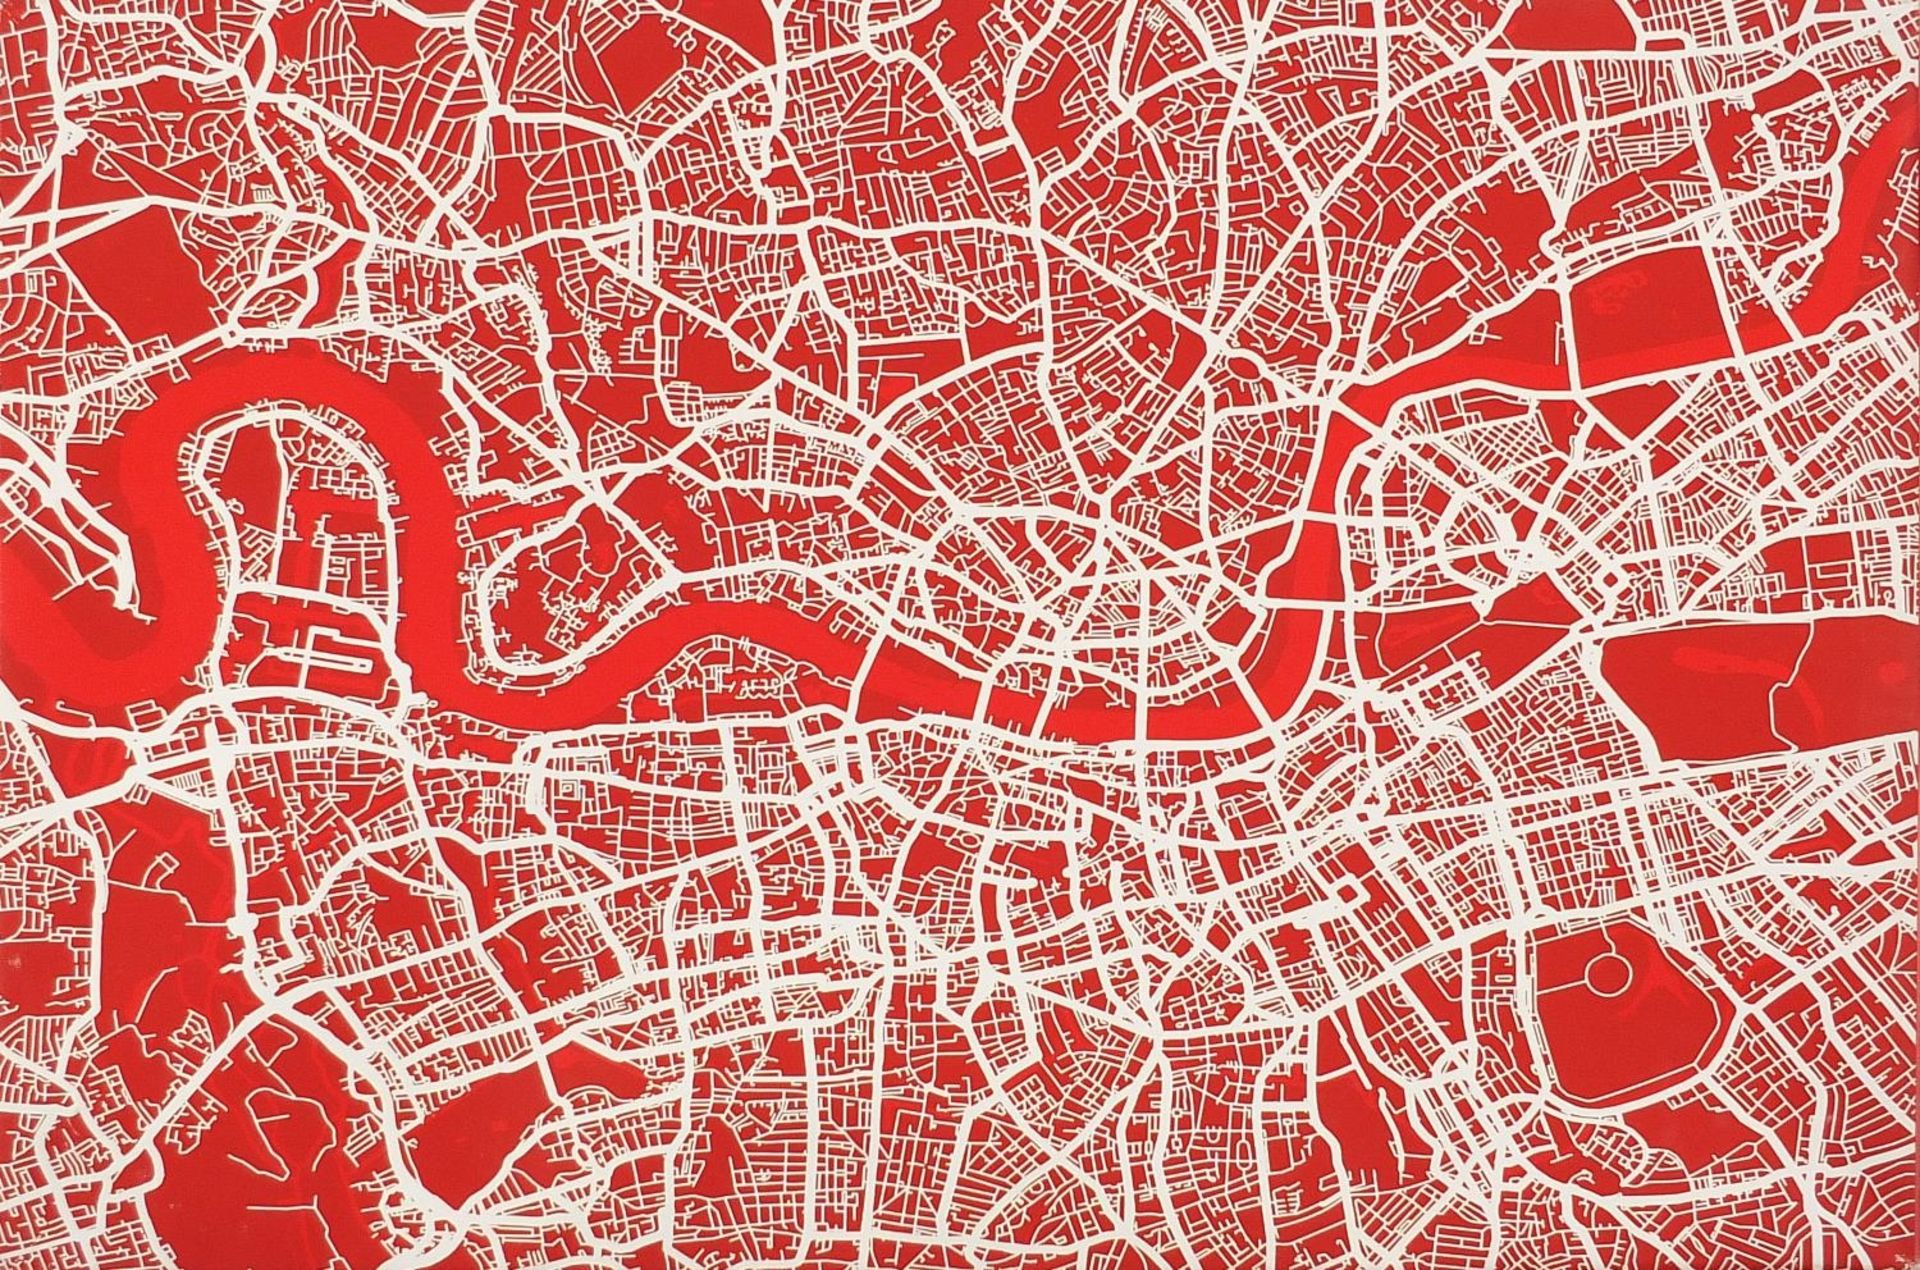 Map of London and map of the UK with city names, two canvas prints, unframed, the largest 102cm x - Image 4 of 5